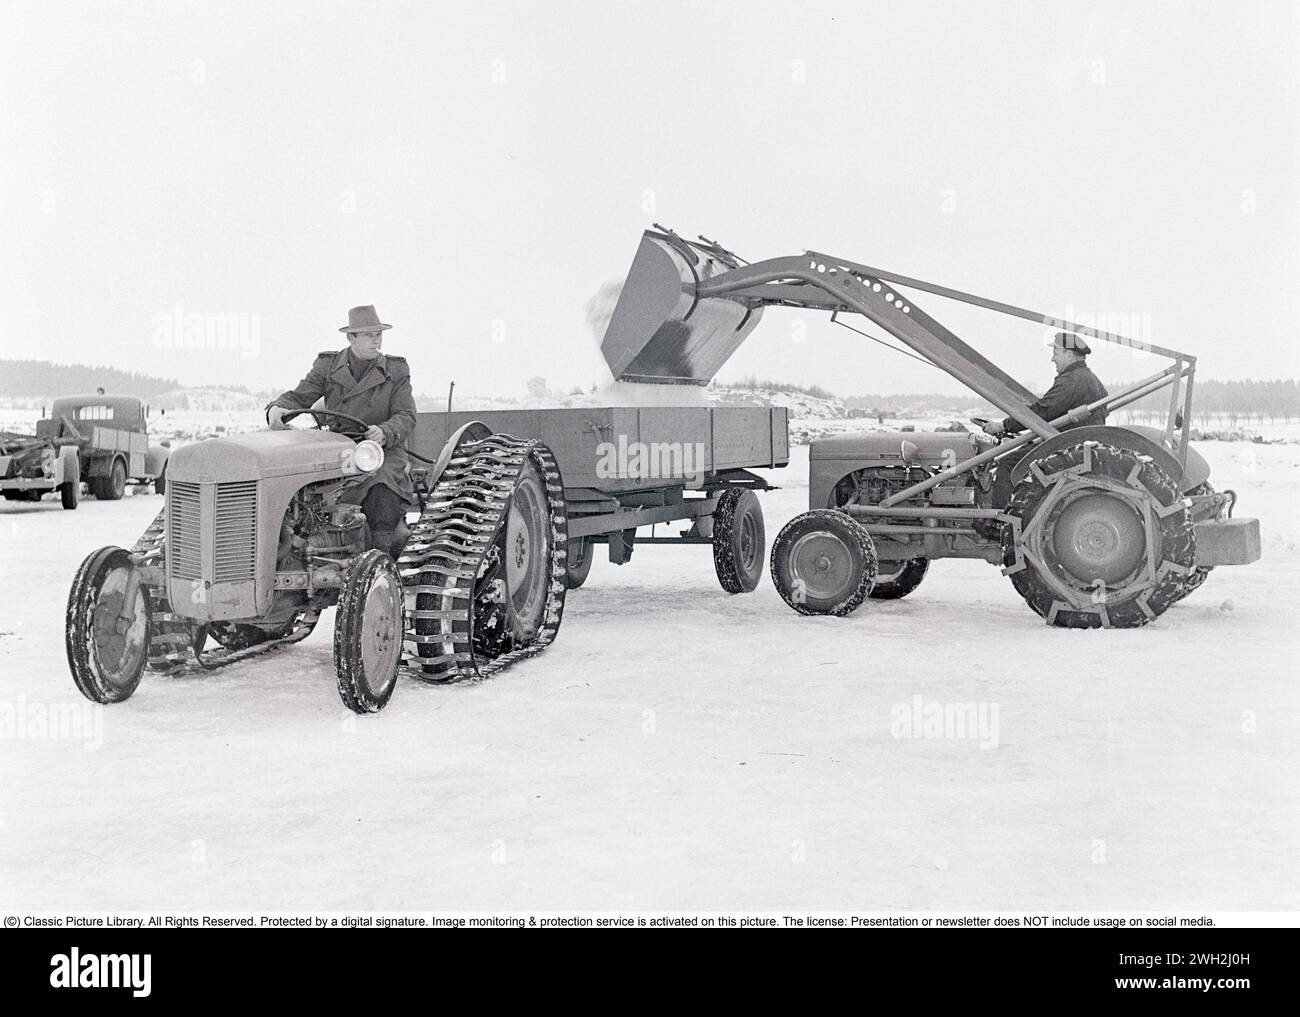 Ferguson tractor in the 1950s. A driver on the iconic Ferguson tractor featured with caterpillar bands and a one-axled wagon behind. Another Ferguson tractor with a loader, dumps snow onto it. The Ferguson tractors were the first modern agricultural tractors and its three poinkt linkage system was a major development.   1951. Kristoffersson ref BB46-2 Stock Photo